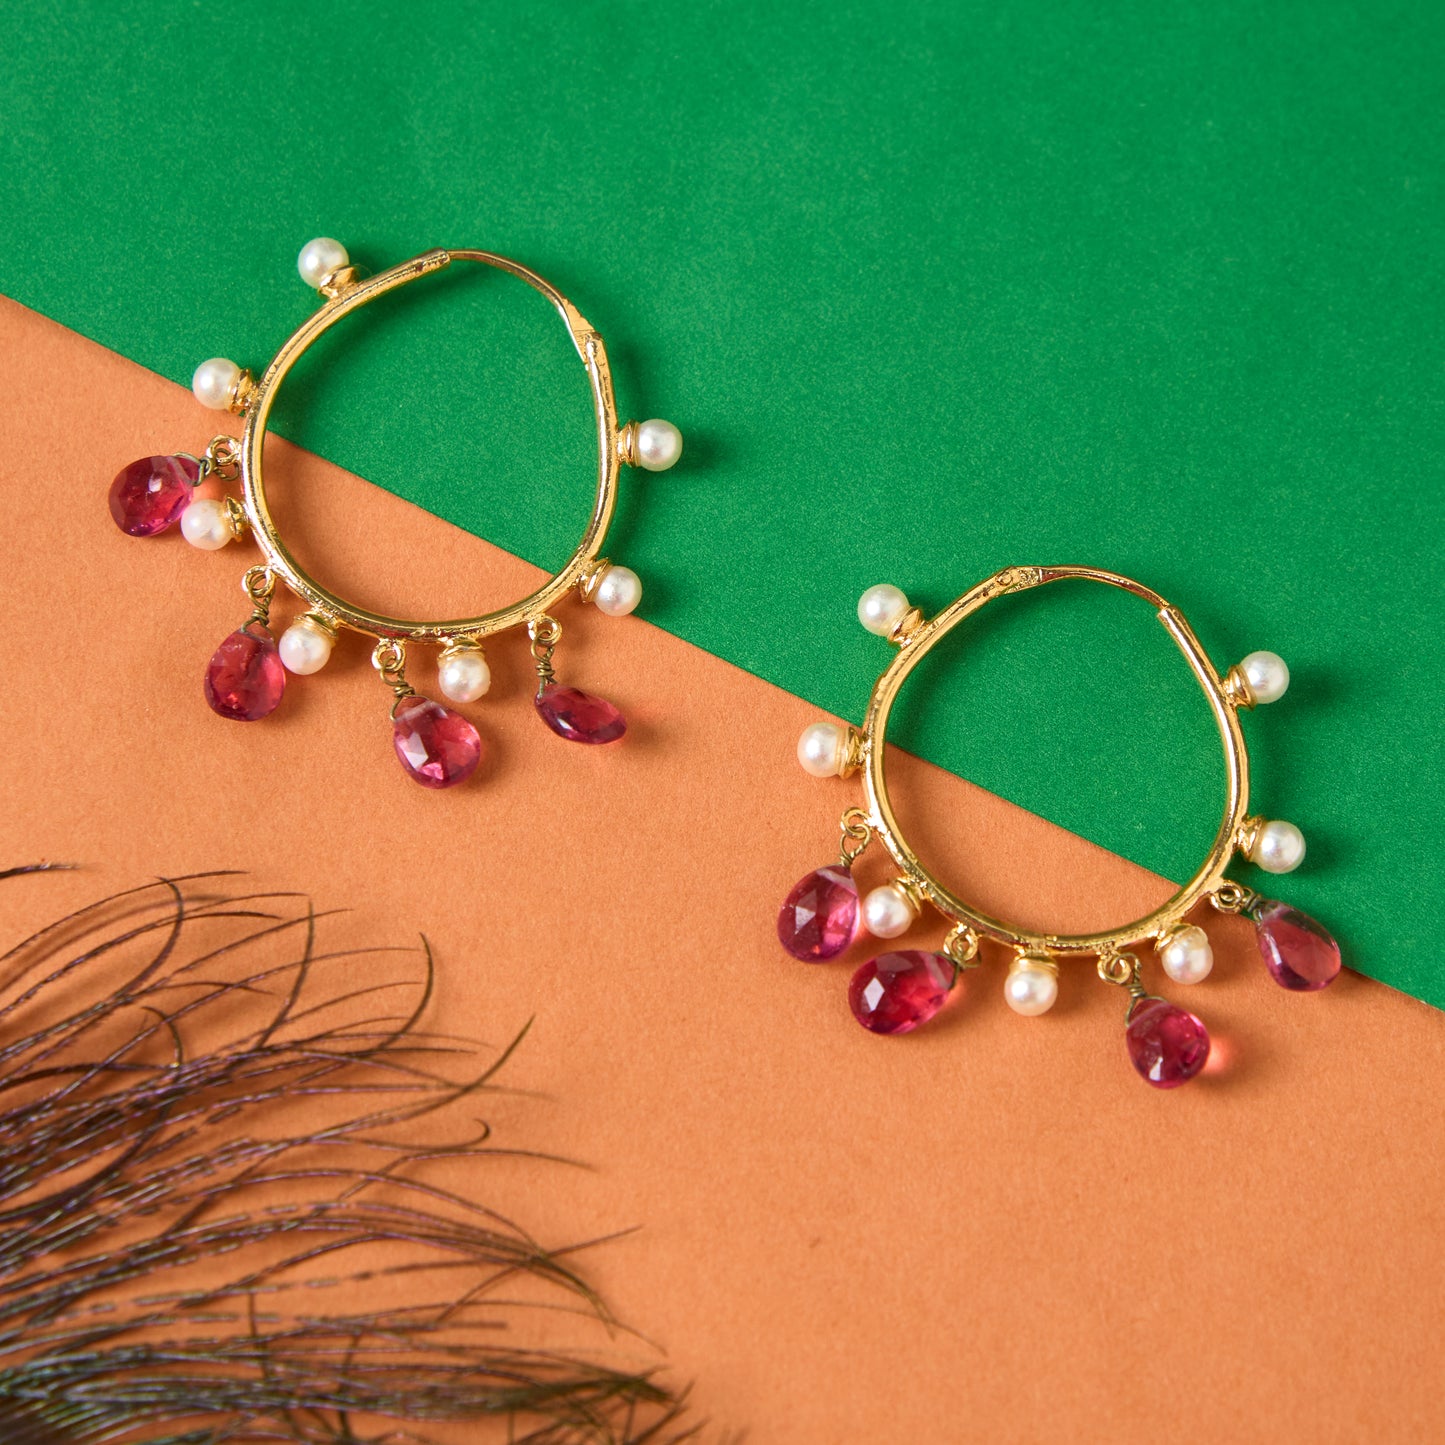 Moonstruck Gold Plated Hoop Earrings With Pearls for Women (Pink) - www.MoonstruckINC.com